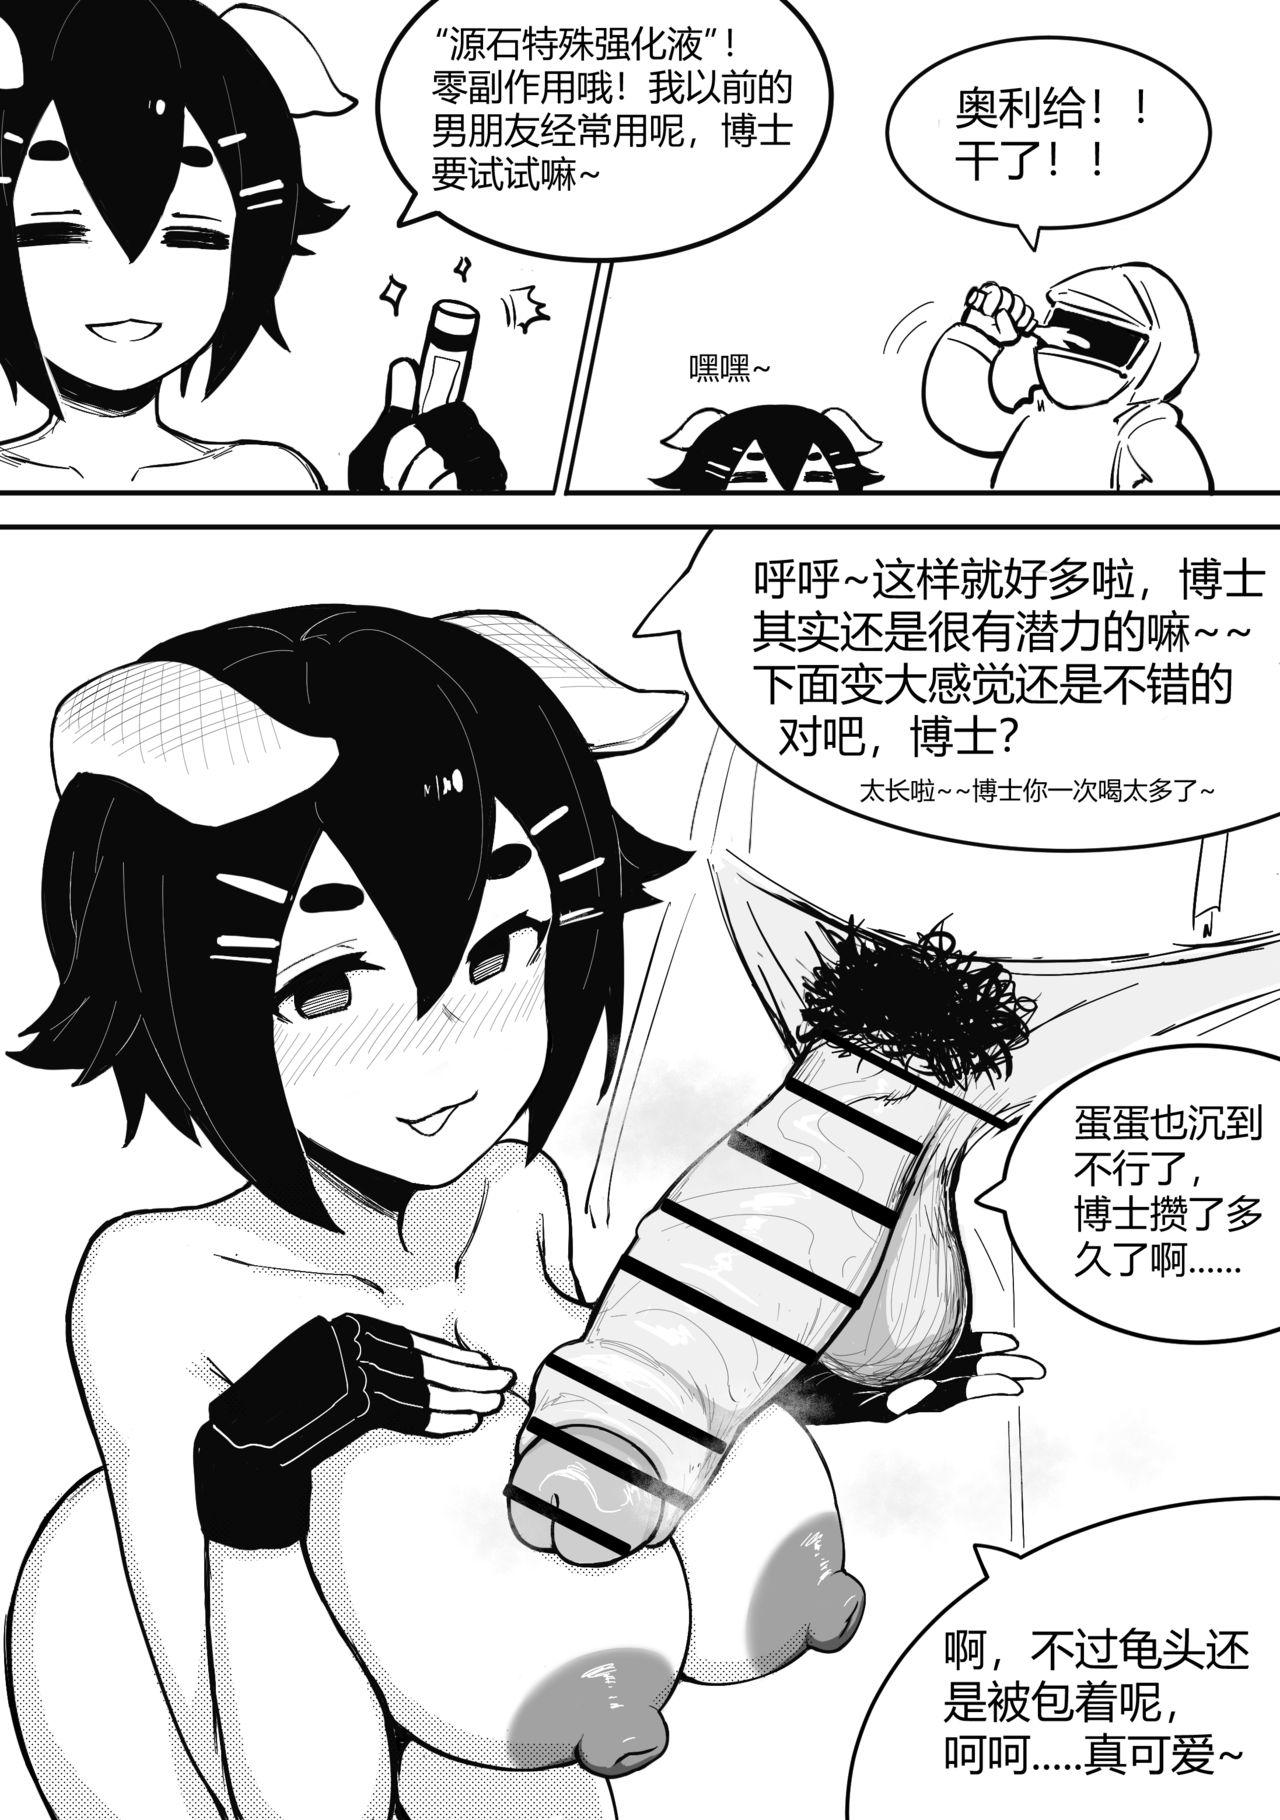 Aunt 可爱的杰克【9P】（Arknights） - Arknights Spying - Page 4